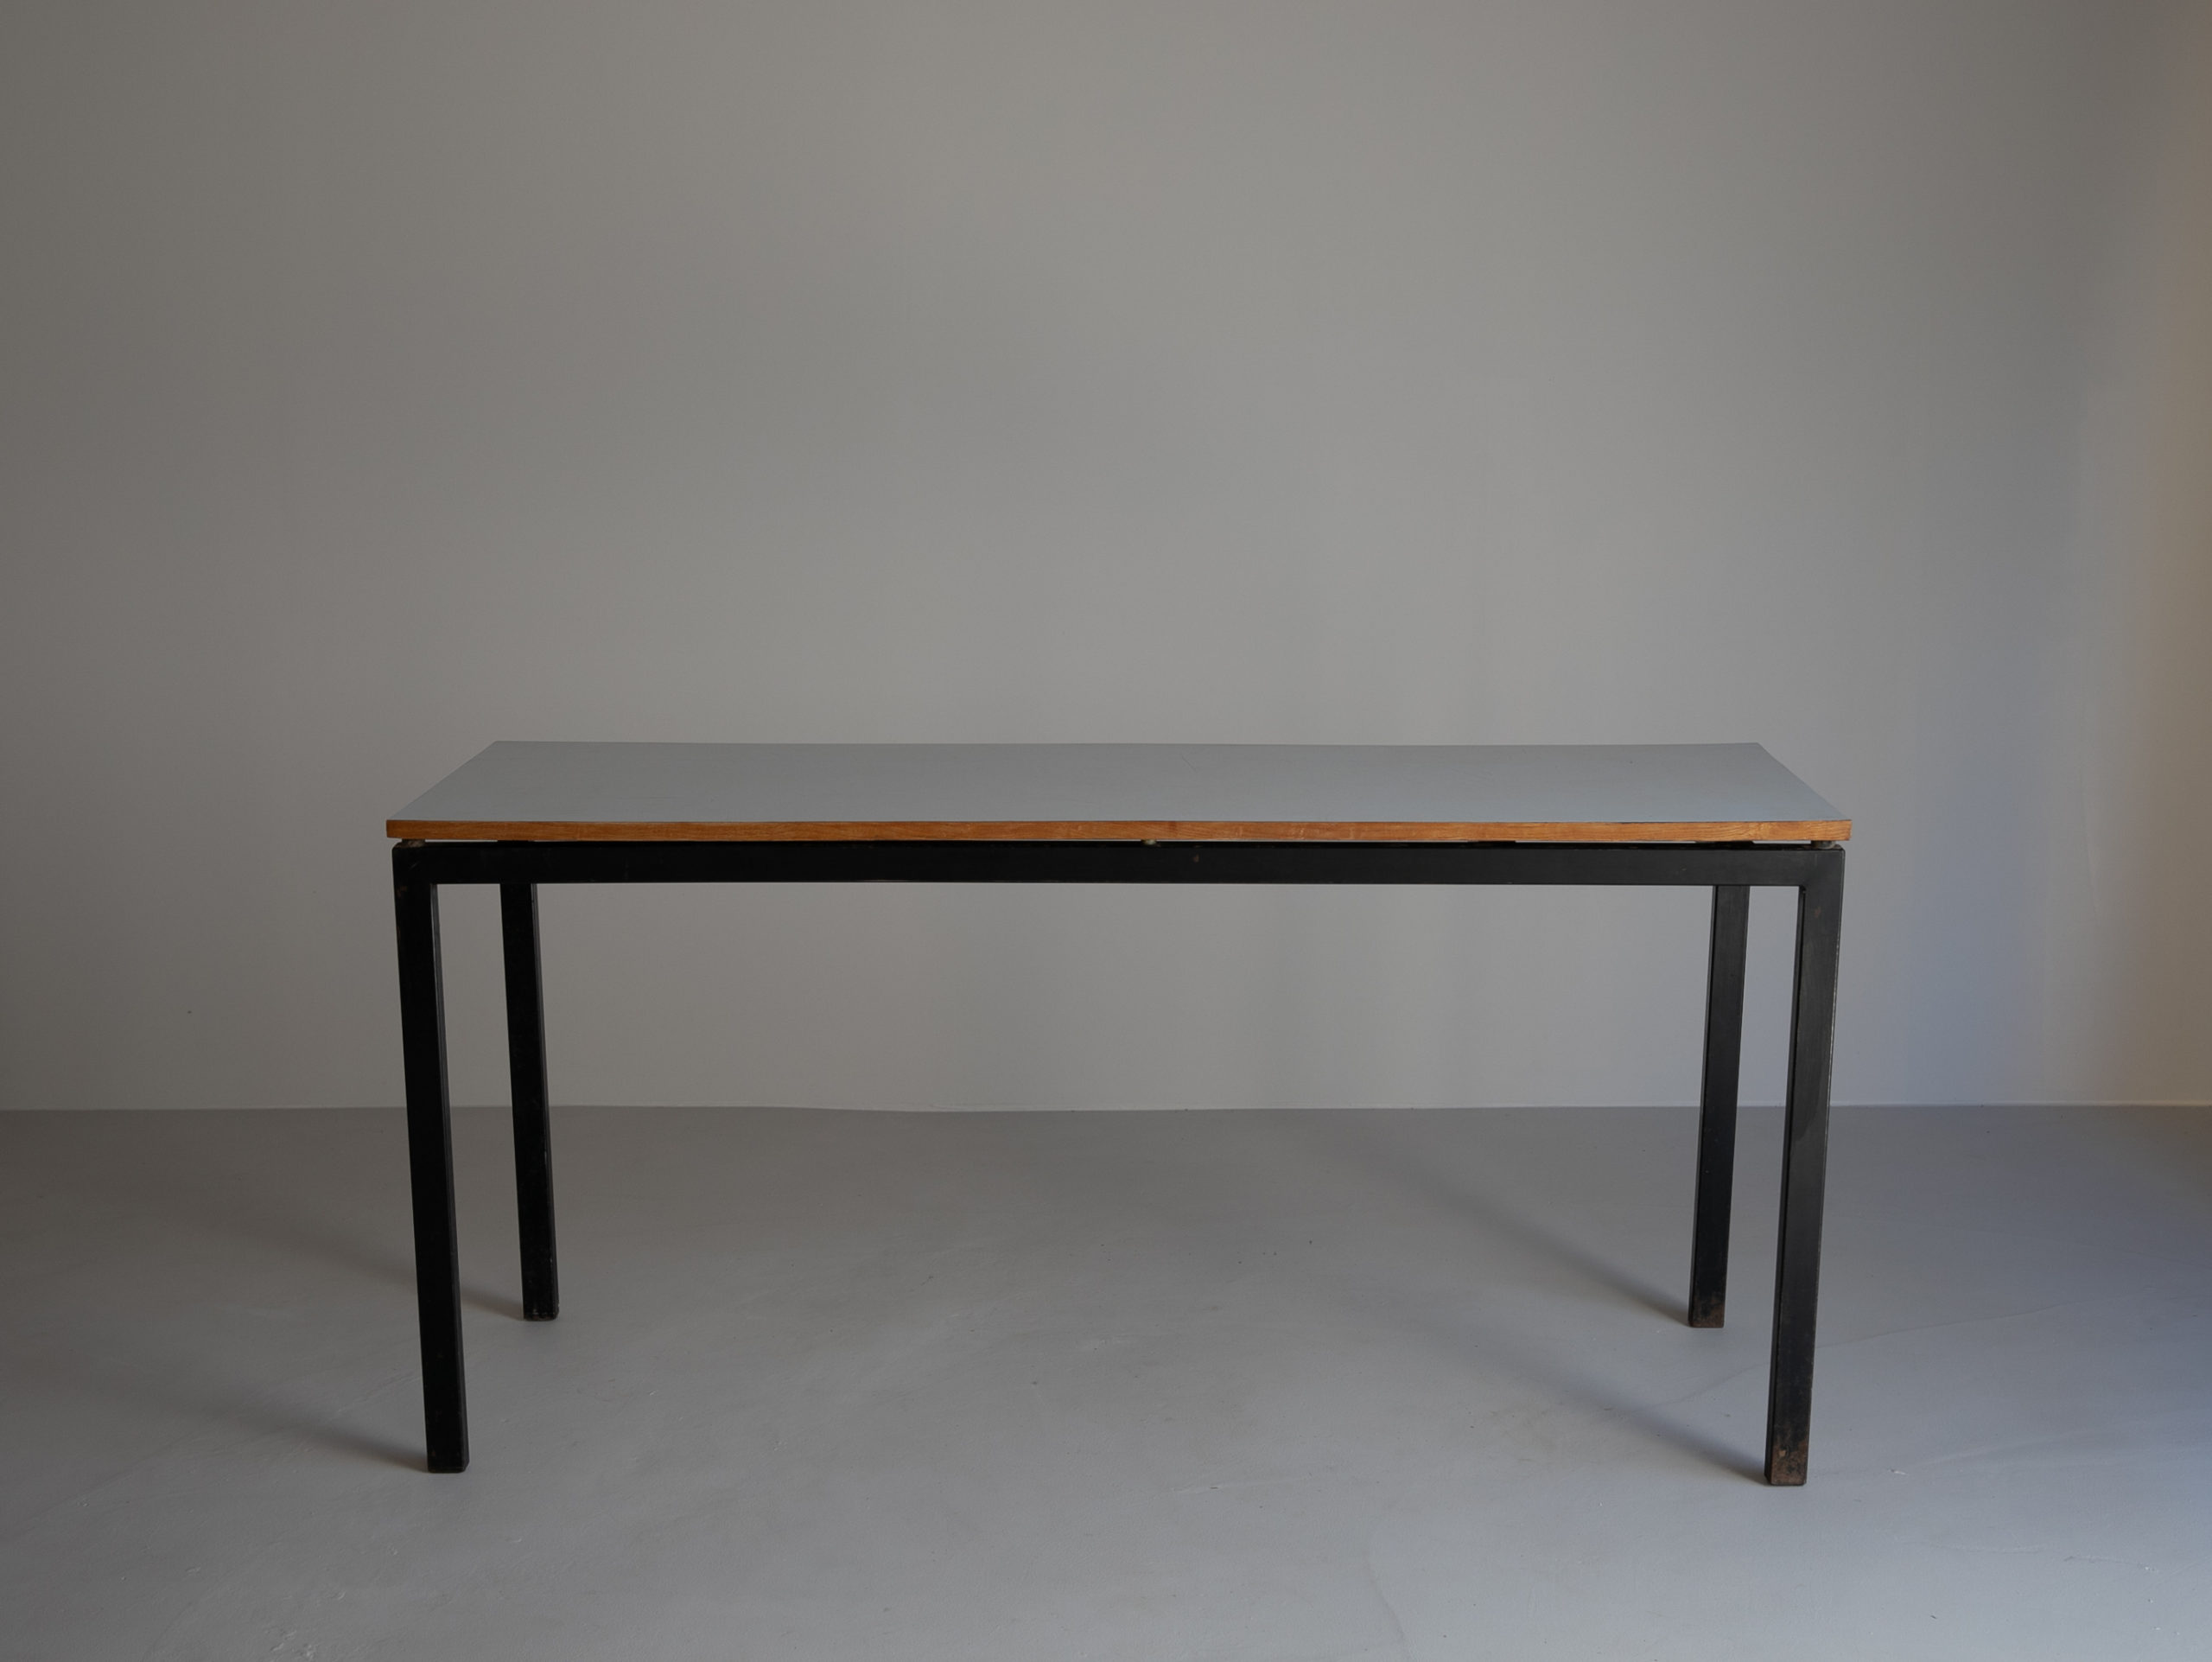 Desk from Cite Cansado by Charlotte Perriand